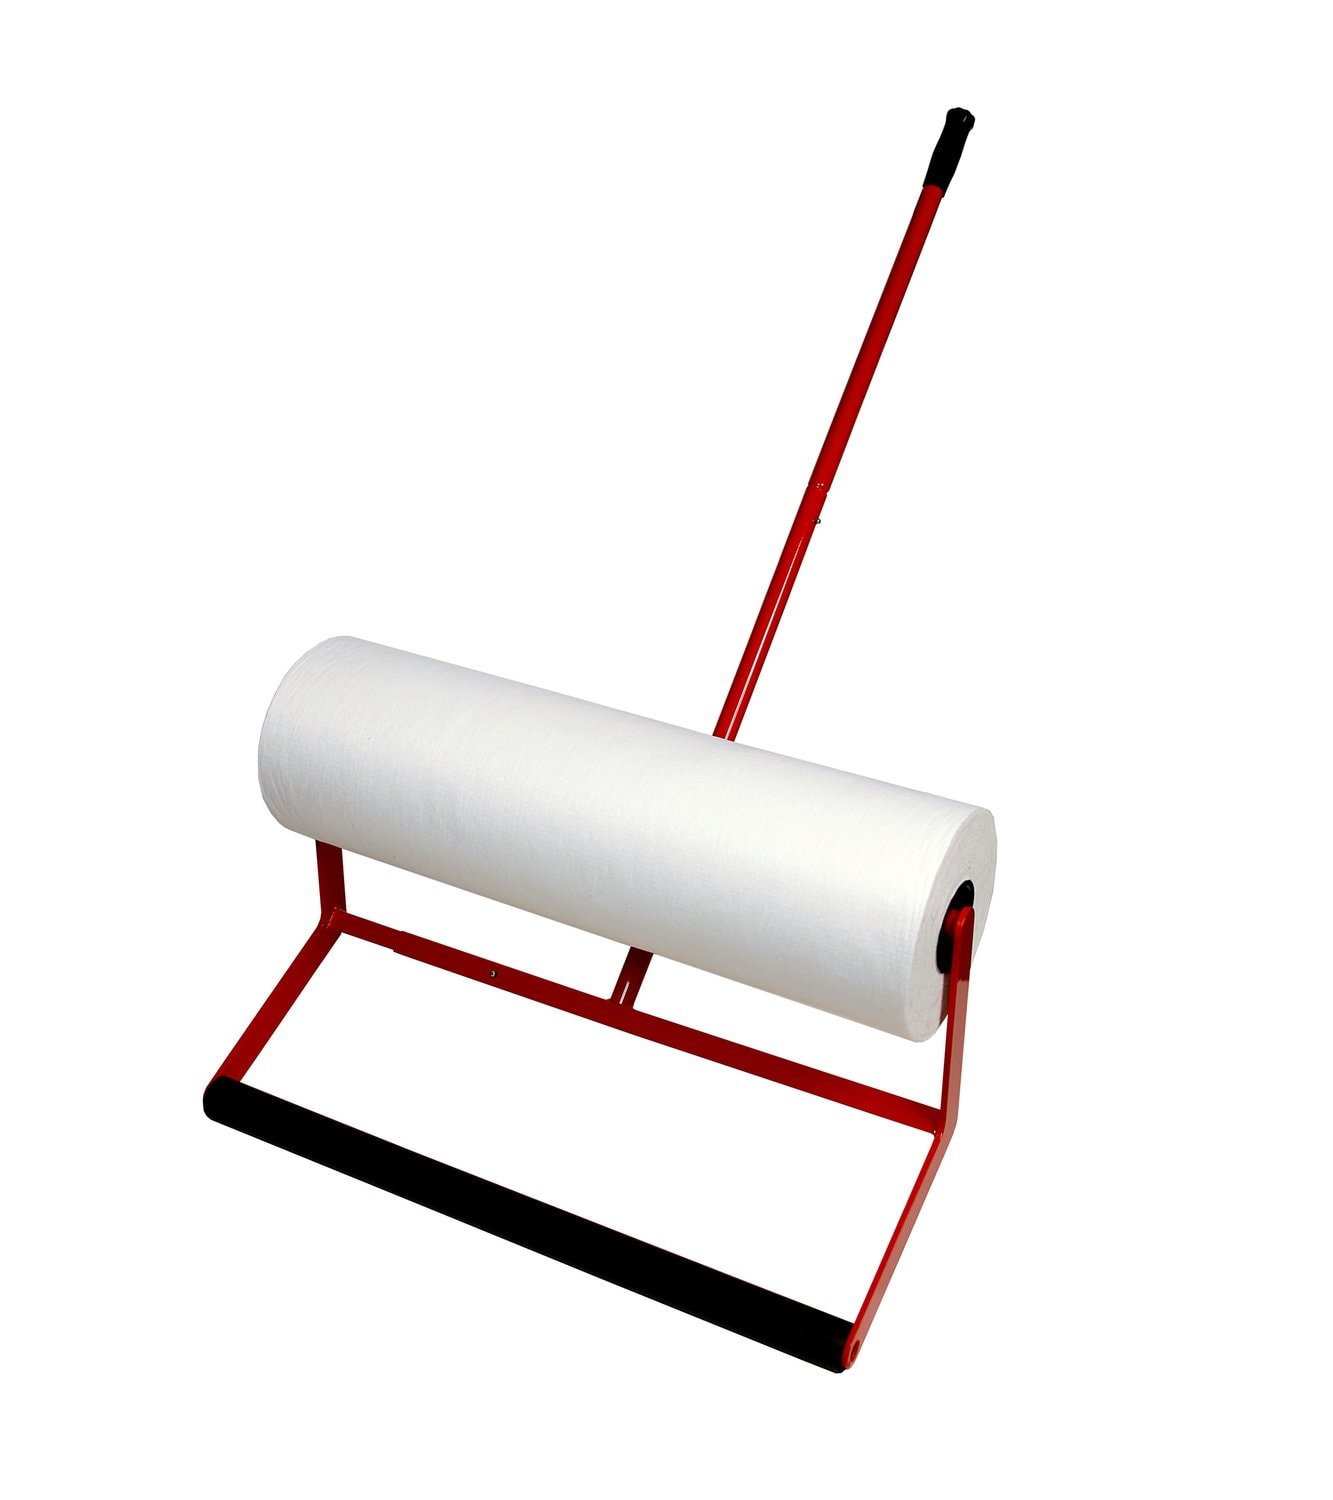 7100226305 - 3M Surface Protection Material Floor Applicator 36865, 28 in, 1/Case